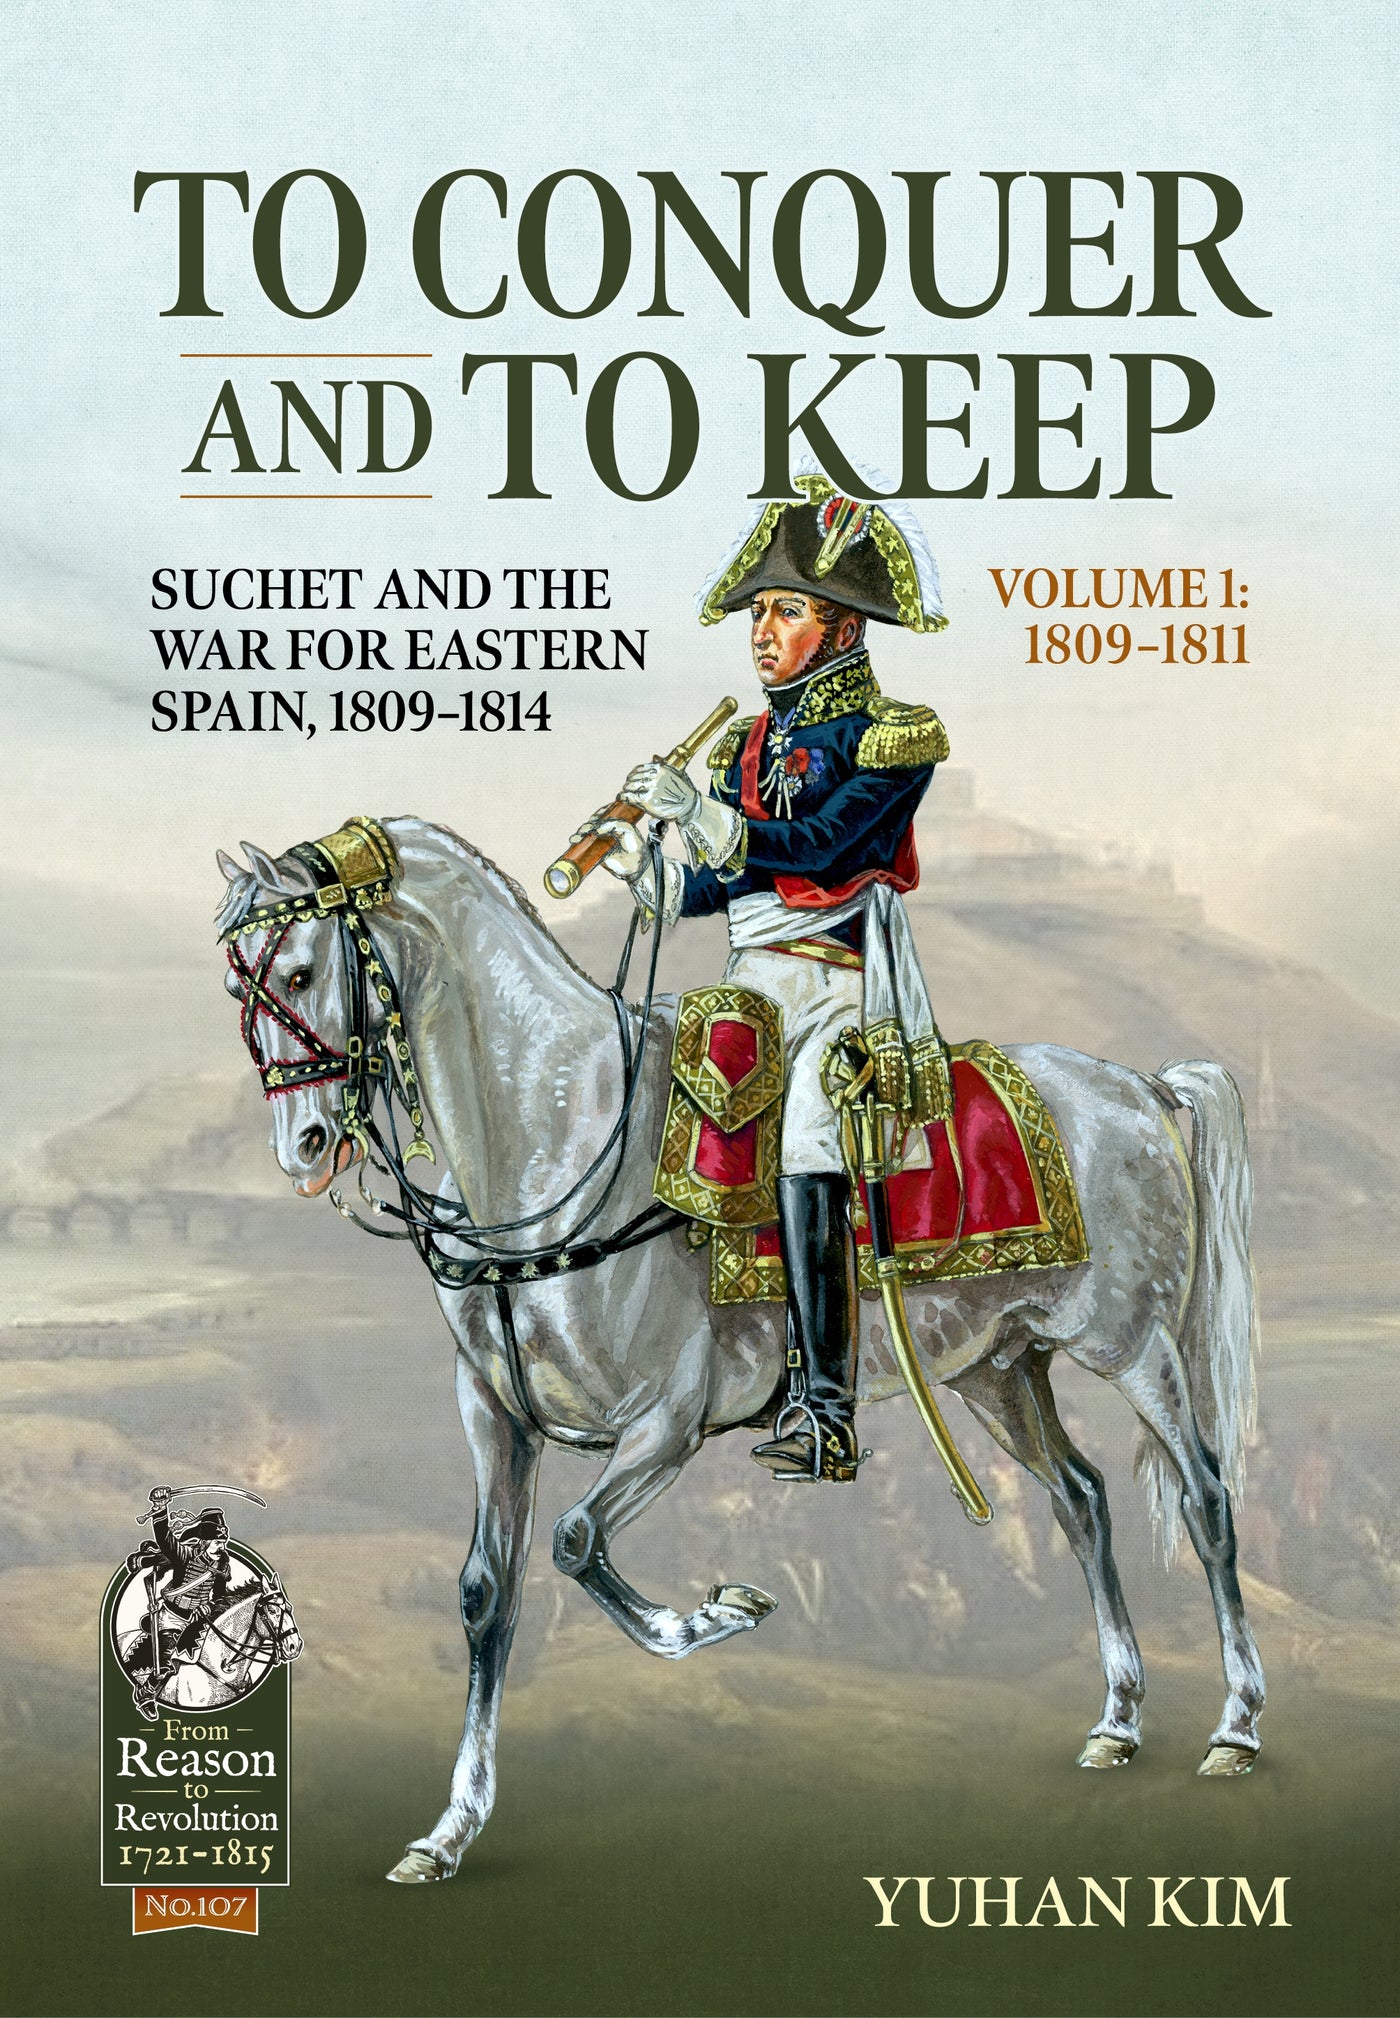 To Conquer And to Keep - Suchet and the War for Eastern Spain, 1809-1814